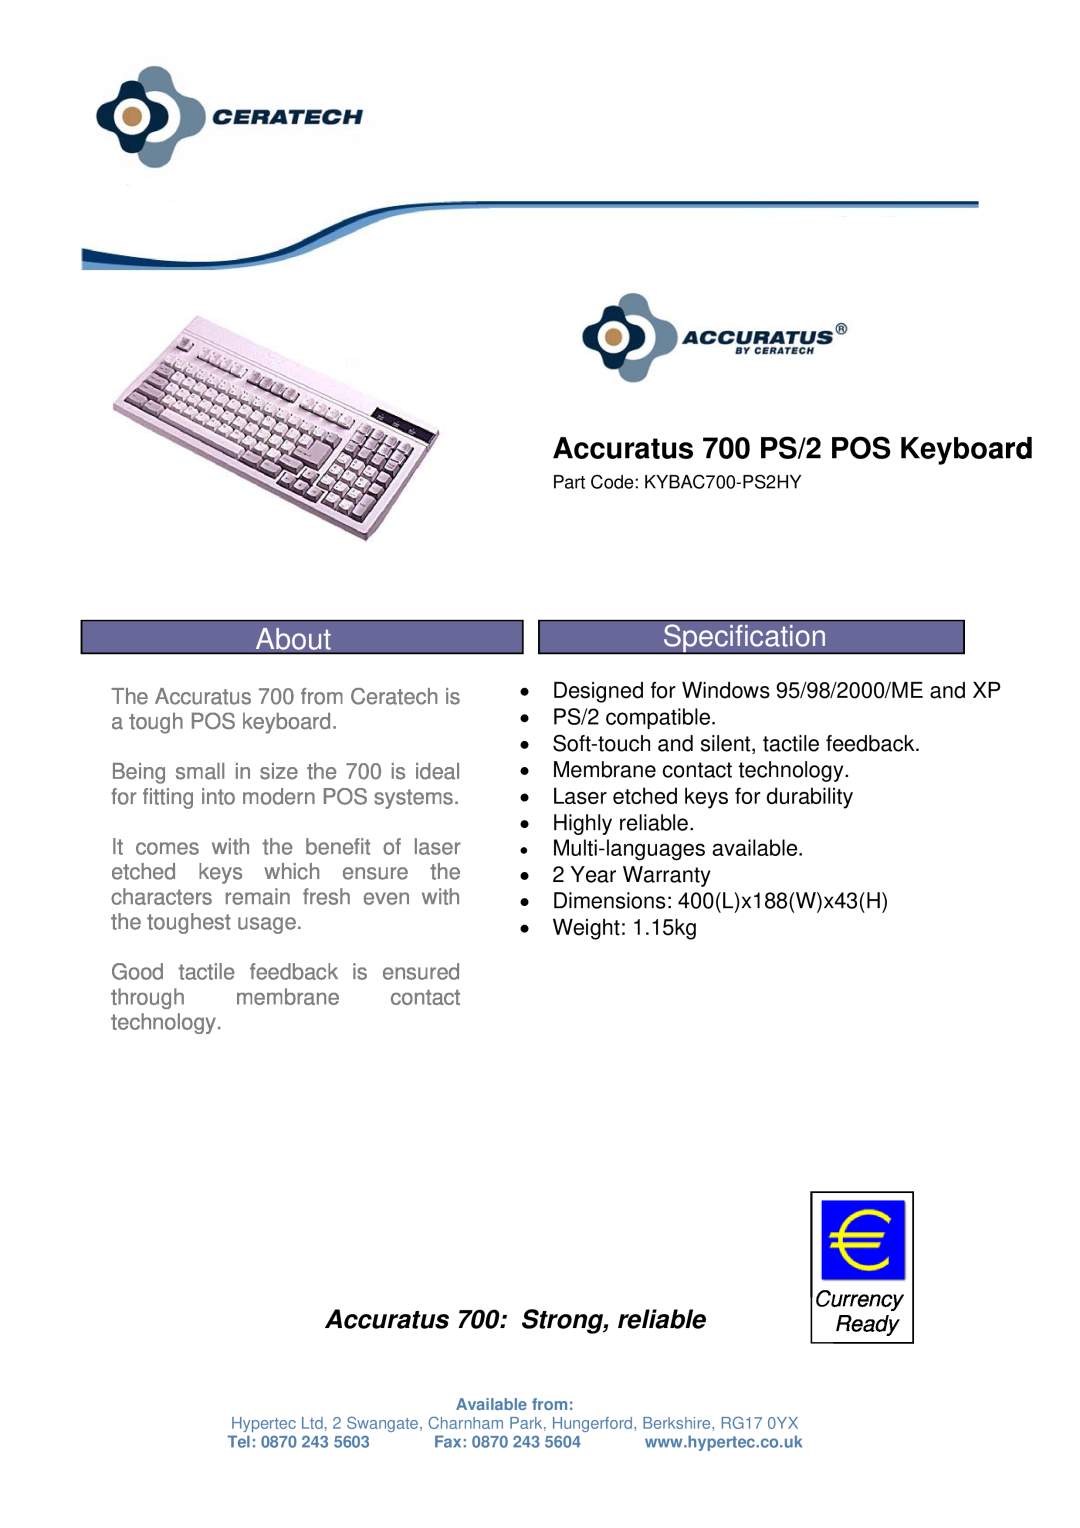 Hypertec KYBAC700-PS2HY warranty About, Accuratus 700 PS/2 POS Keyboard, Specification, Accuratus 700 Strong, reliable 